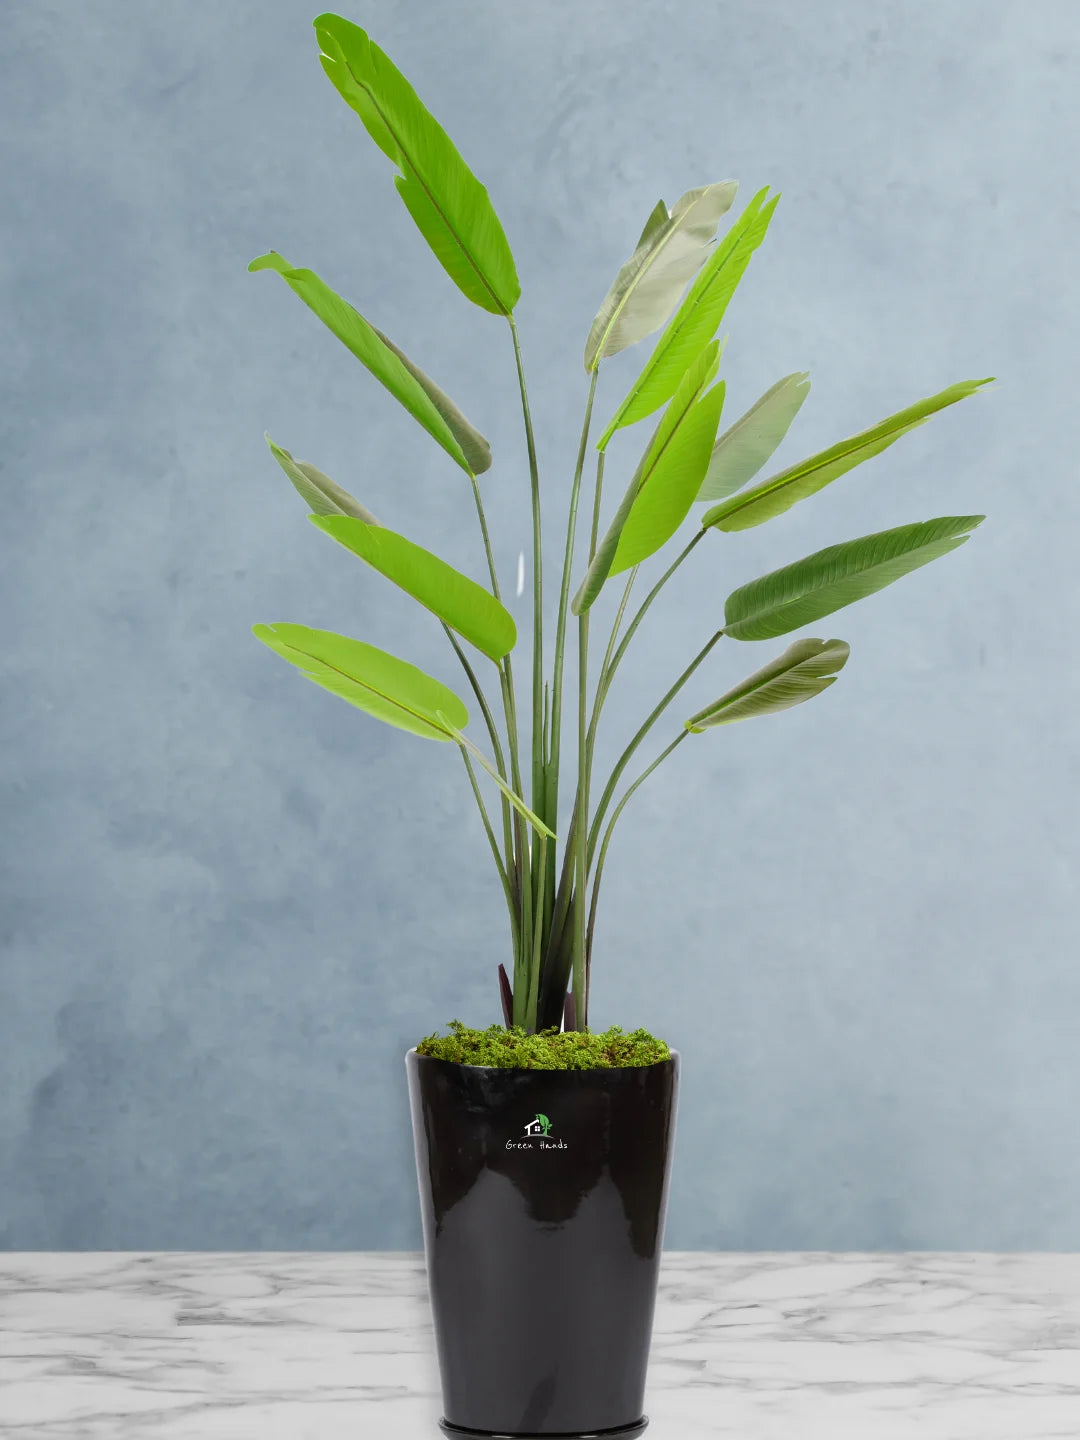 Potted-Artificial-XXL-Bird-of-Paradise-Tree-in-Premium-Glossy-White-Ceramic-Pot